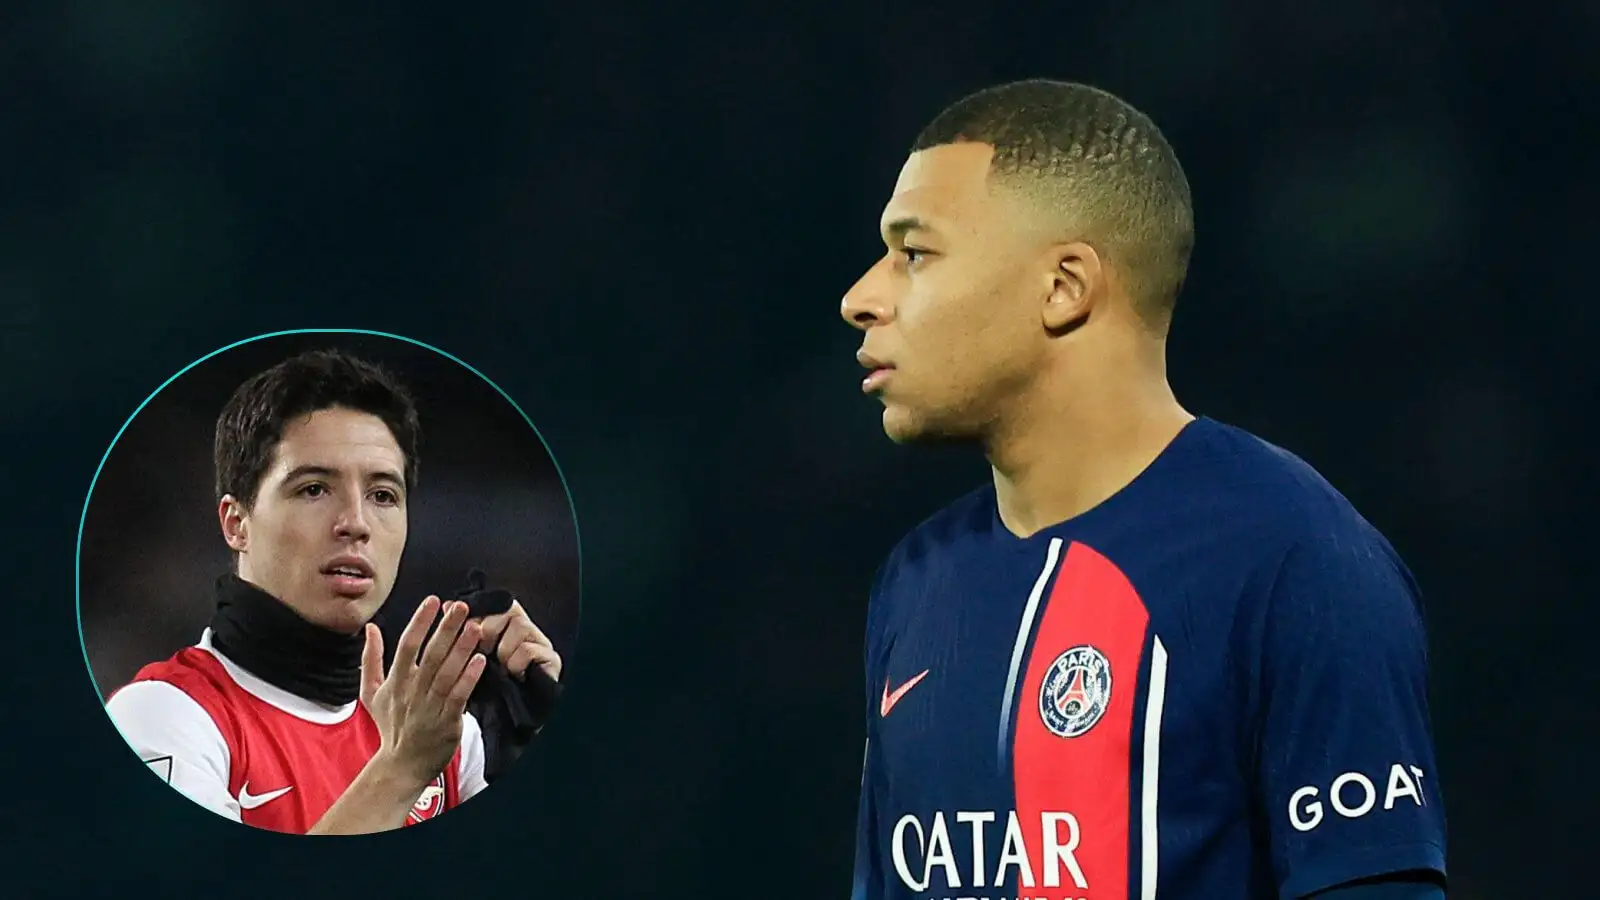 Samir Nasri owns advised Kylian Mbappe to stay at PSG.